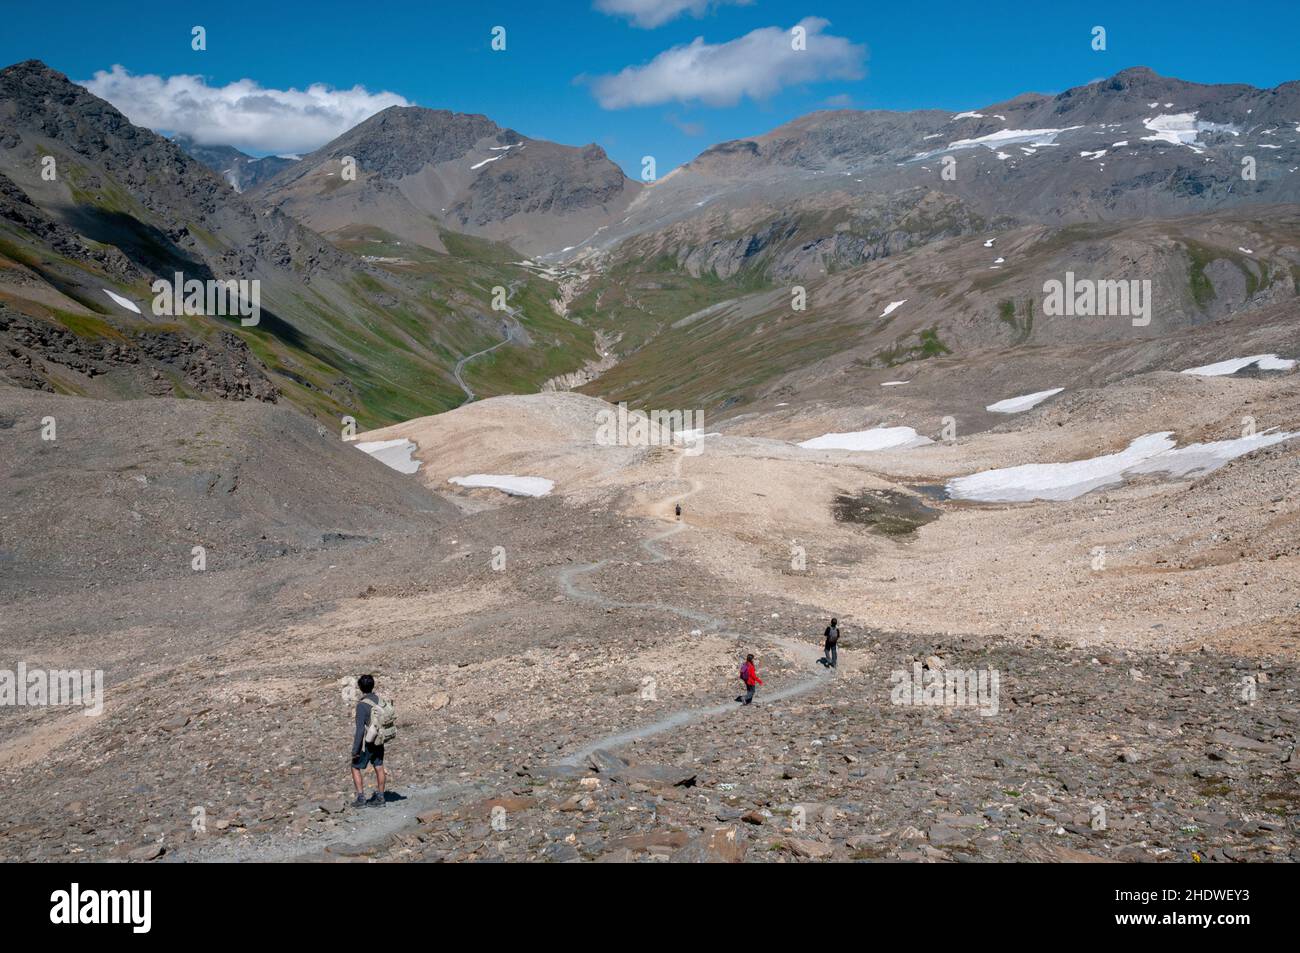 Hikers on the hiking path from ‘Col des Fours’ pass (2976m) to Pont de la Neige carpark with Signal de l’Iseran summit (3237m) and Pers mountain pass Stock Photo